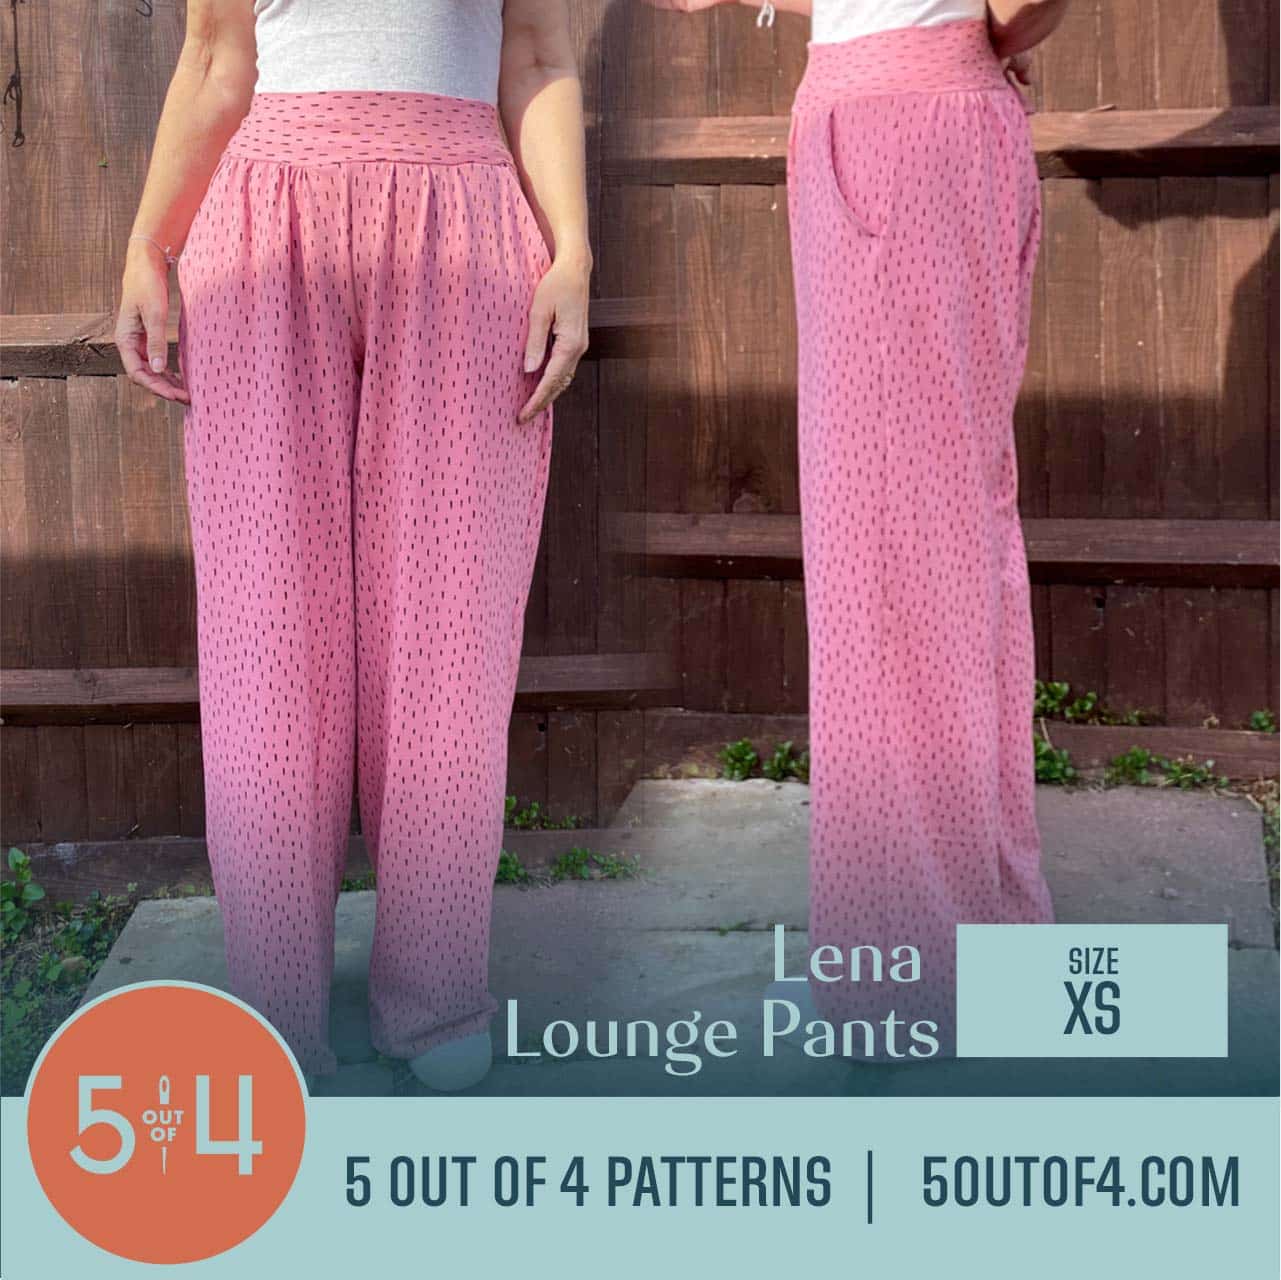 Lena Lounge Pants - 5 out of 4 Patterns